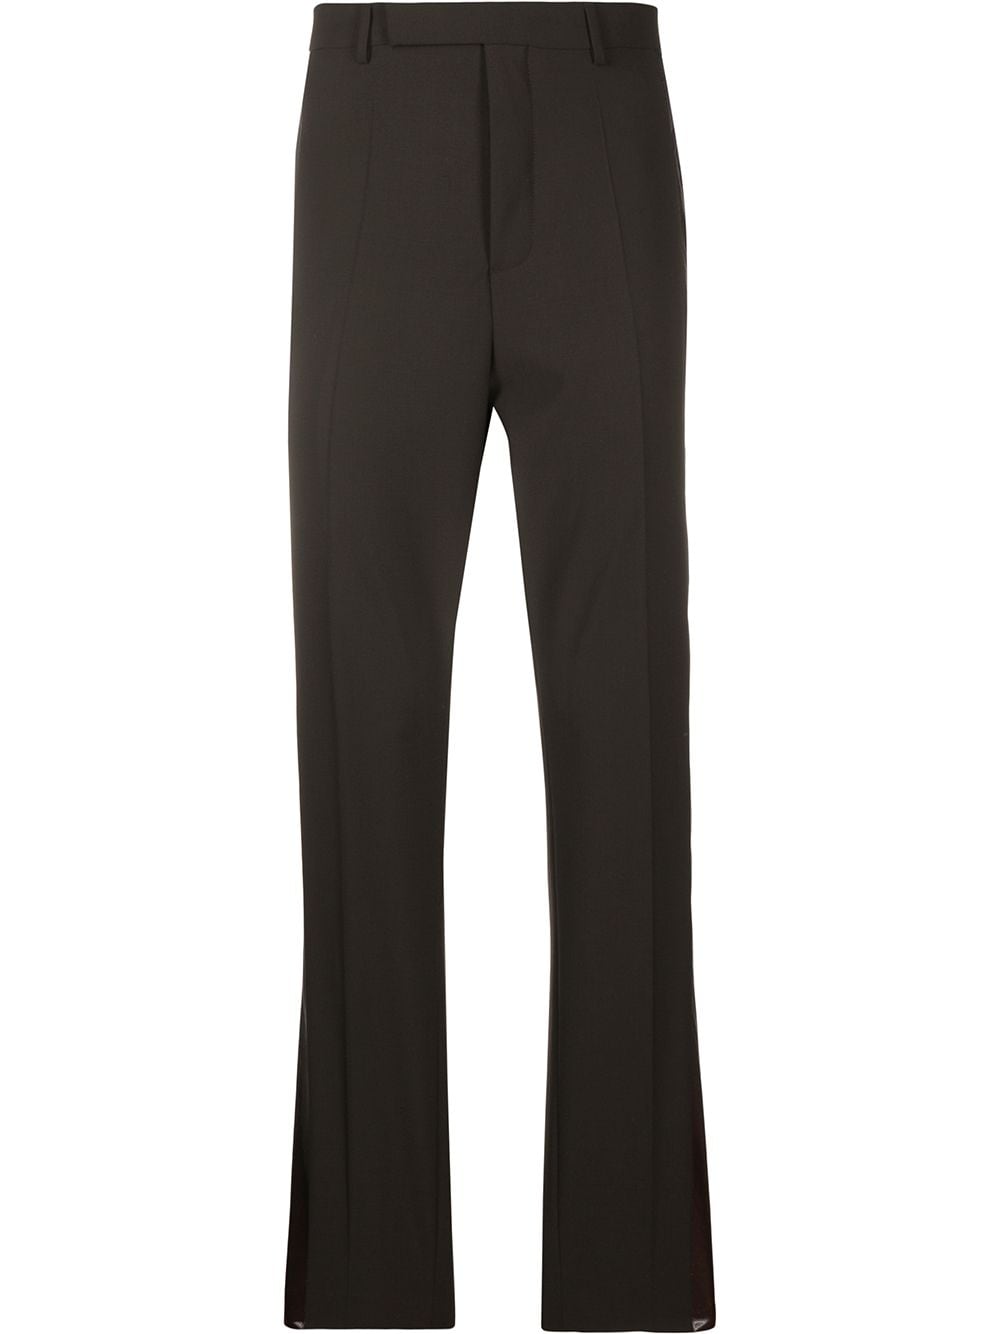 RICK OWENS CONCEALED FRONT TROUSERS